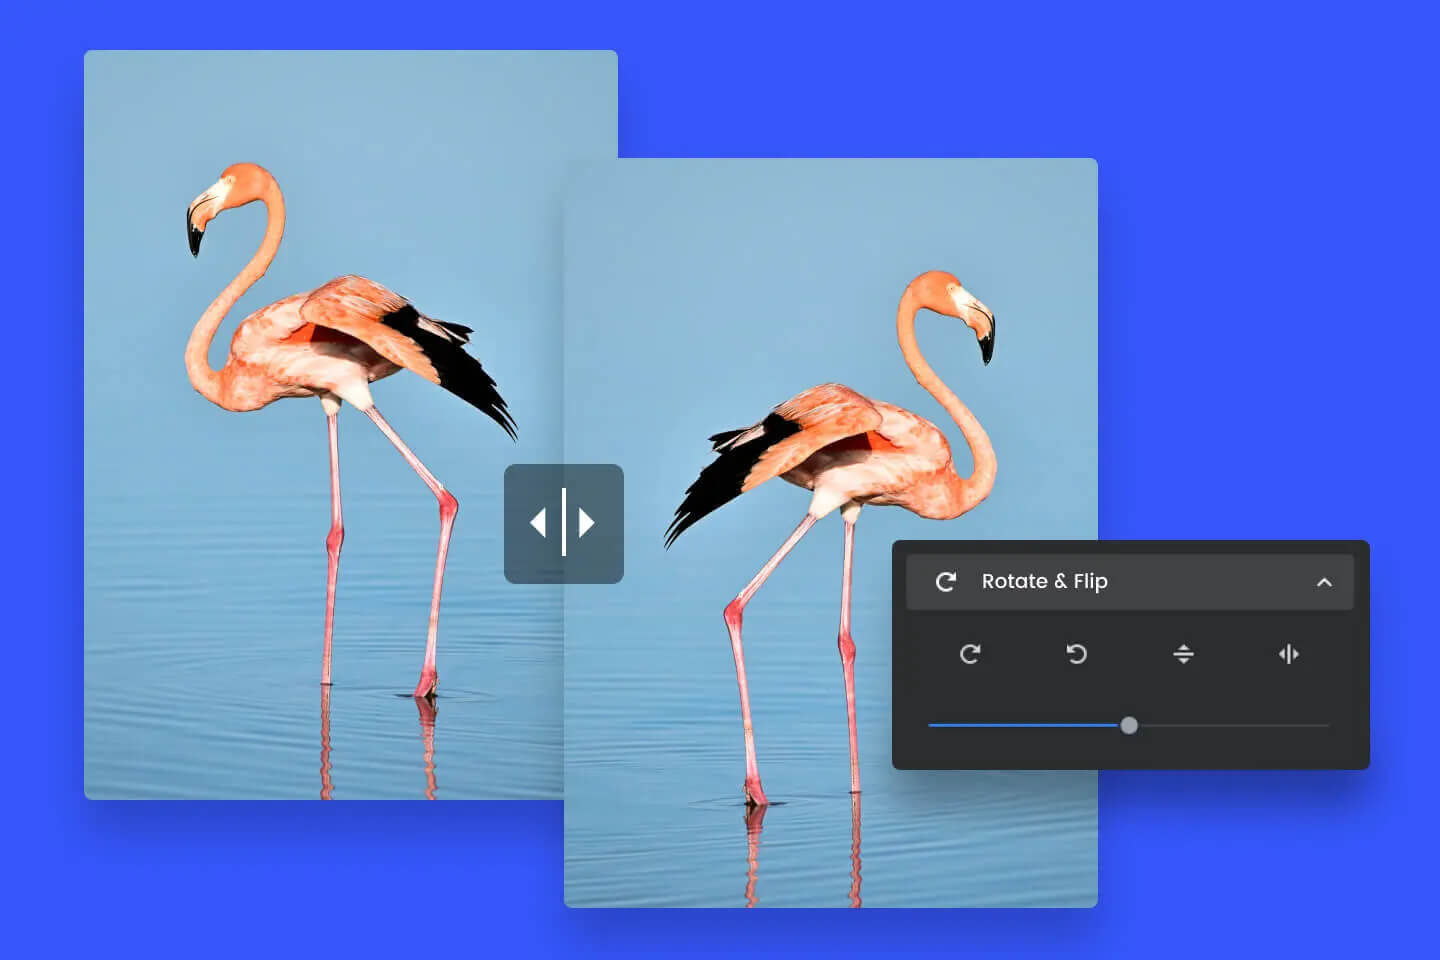 Flip image online instantly with Fotor's free image flipper